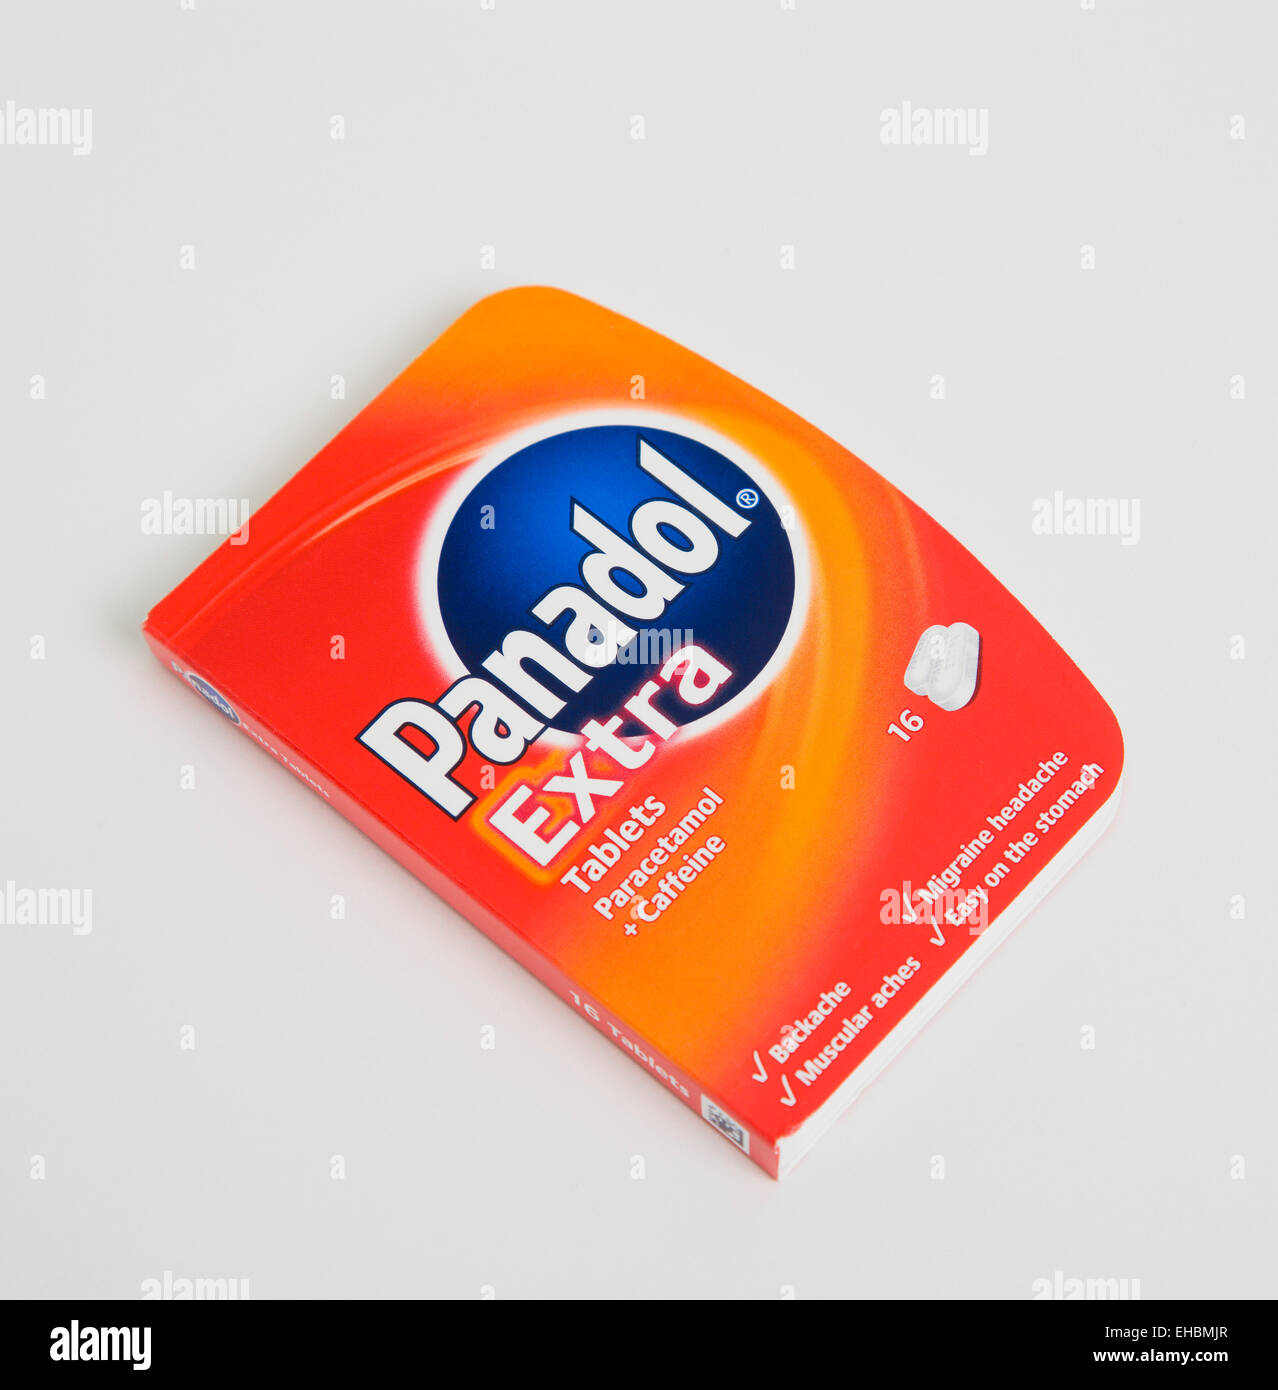 Health, Medical, Medicine, red packet of Panadol Extra pain-killer tablets on a white background. Stock Photo